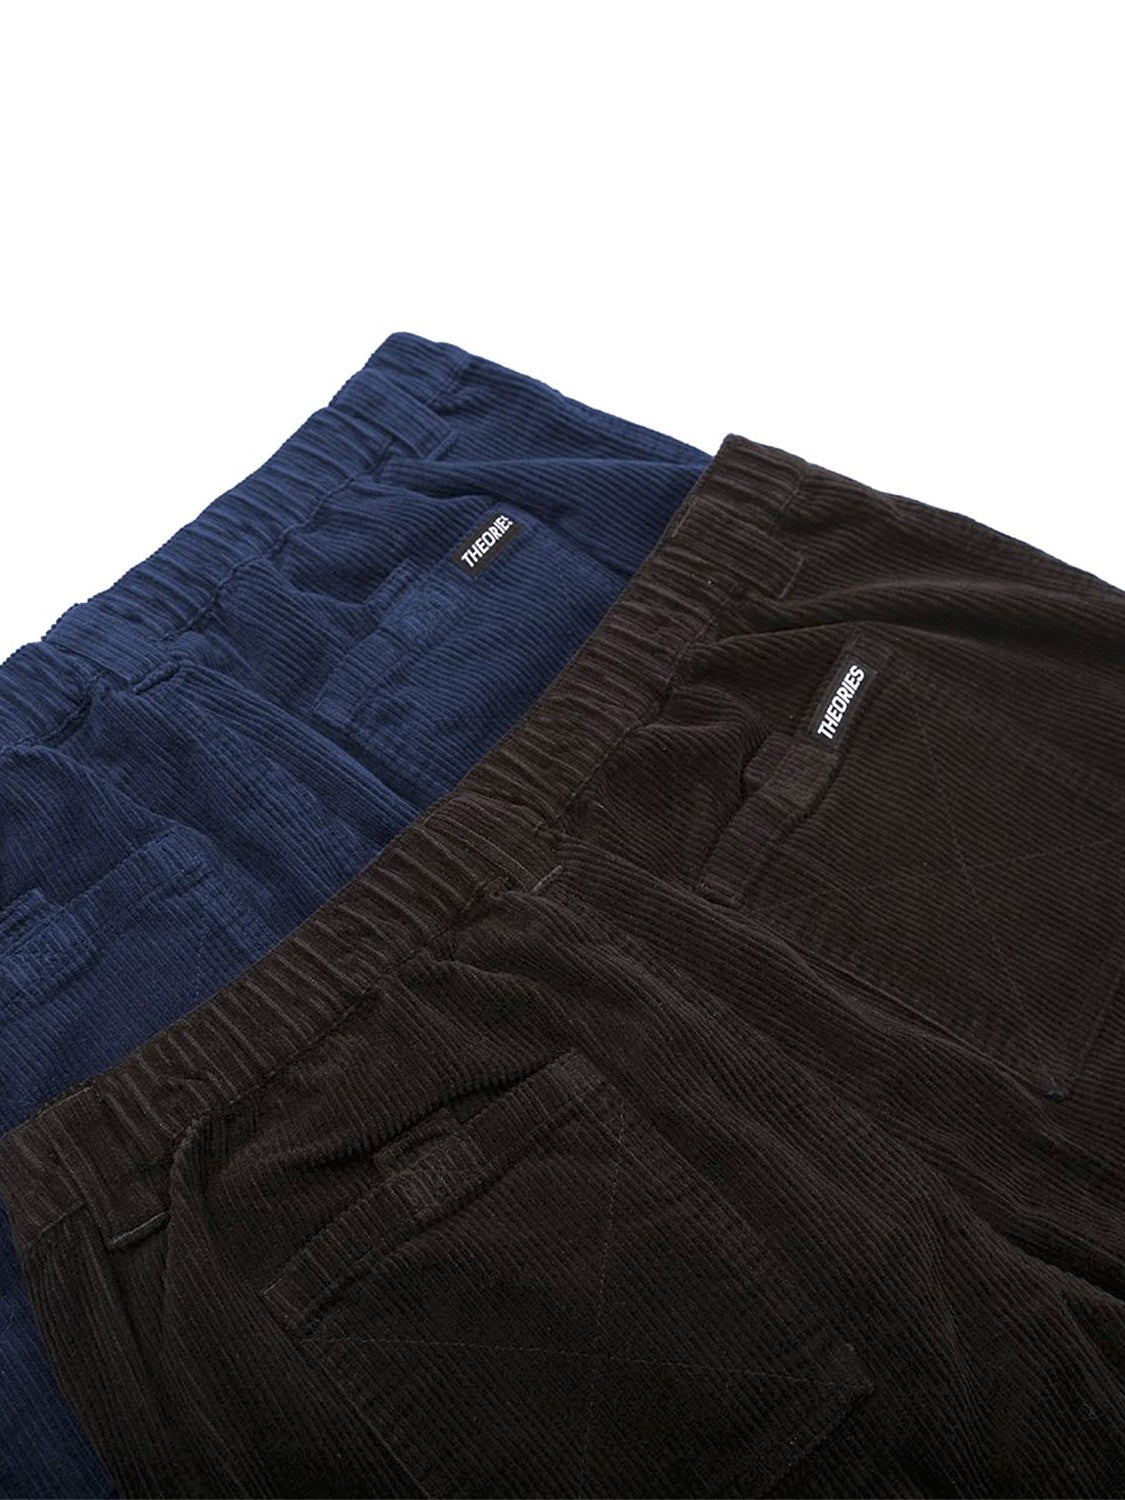 THEORIES Stamp Lounge Pant - Cord Navy